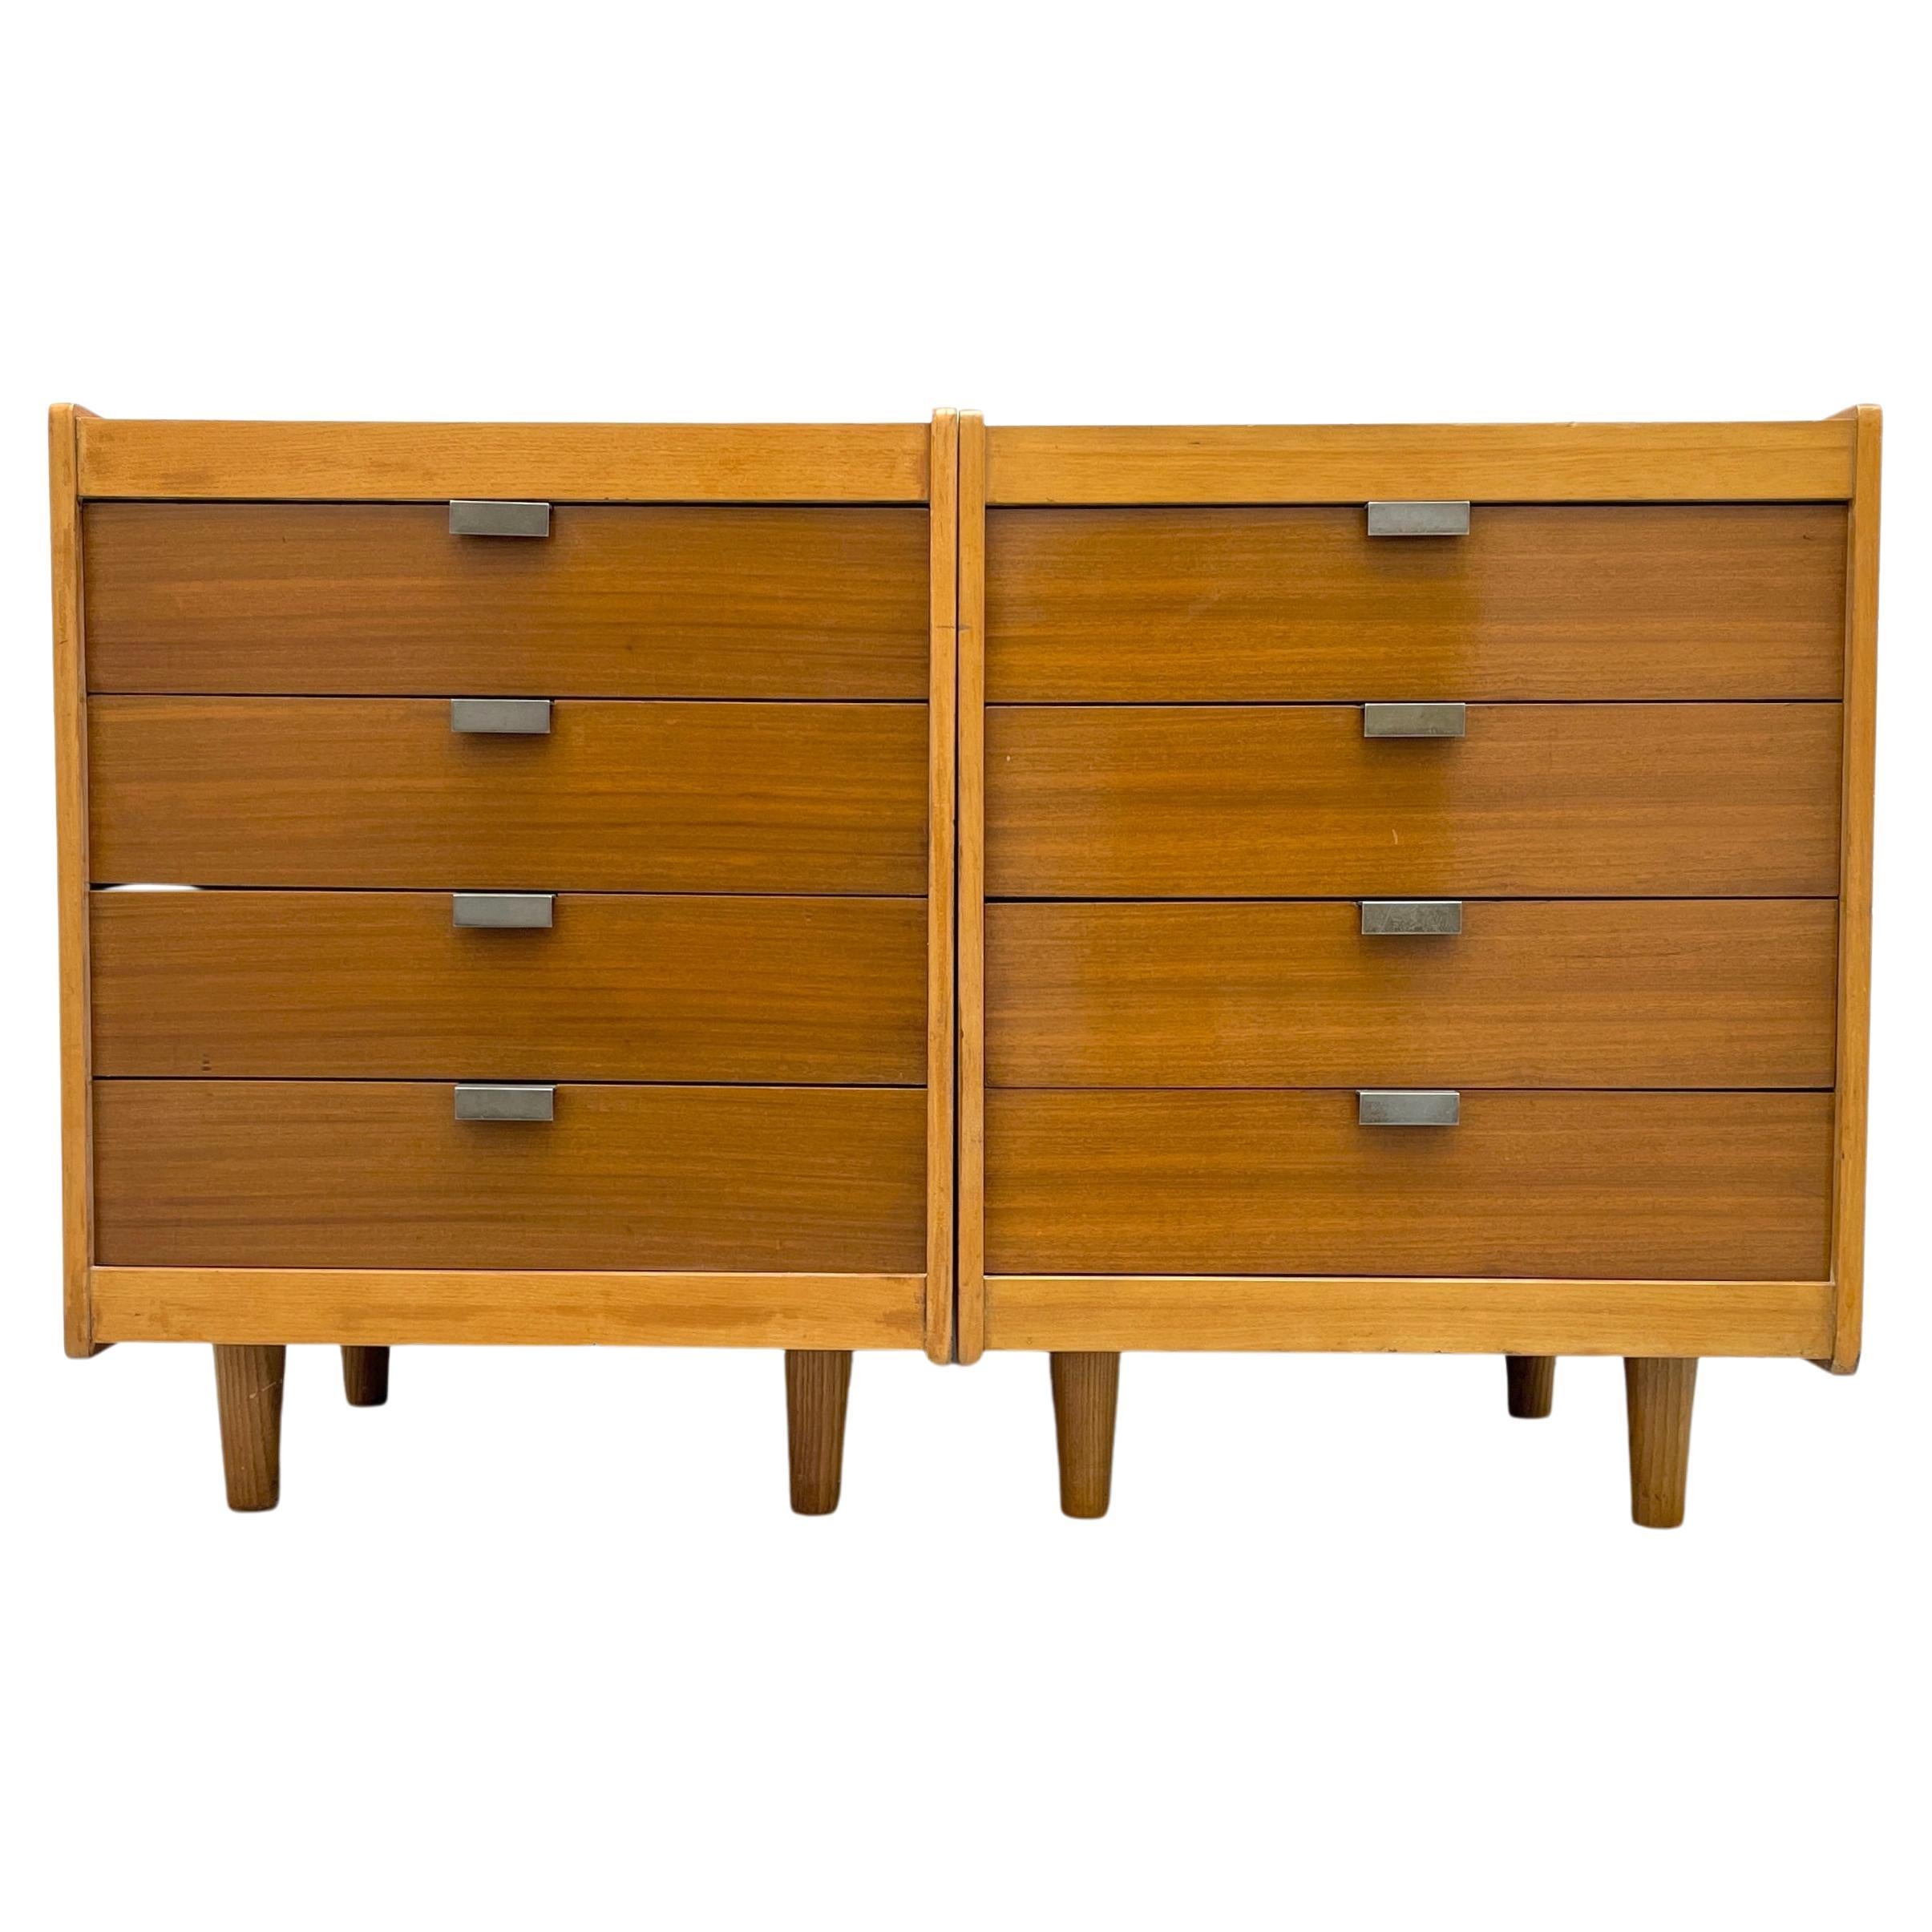 Pair of 4 Drawer Commode in Ash by Alain Richard, Charron Groupe 4, 1954 For Sale